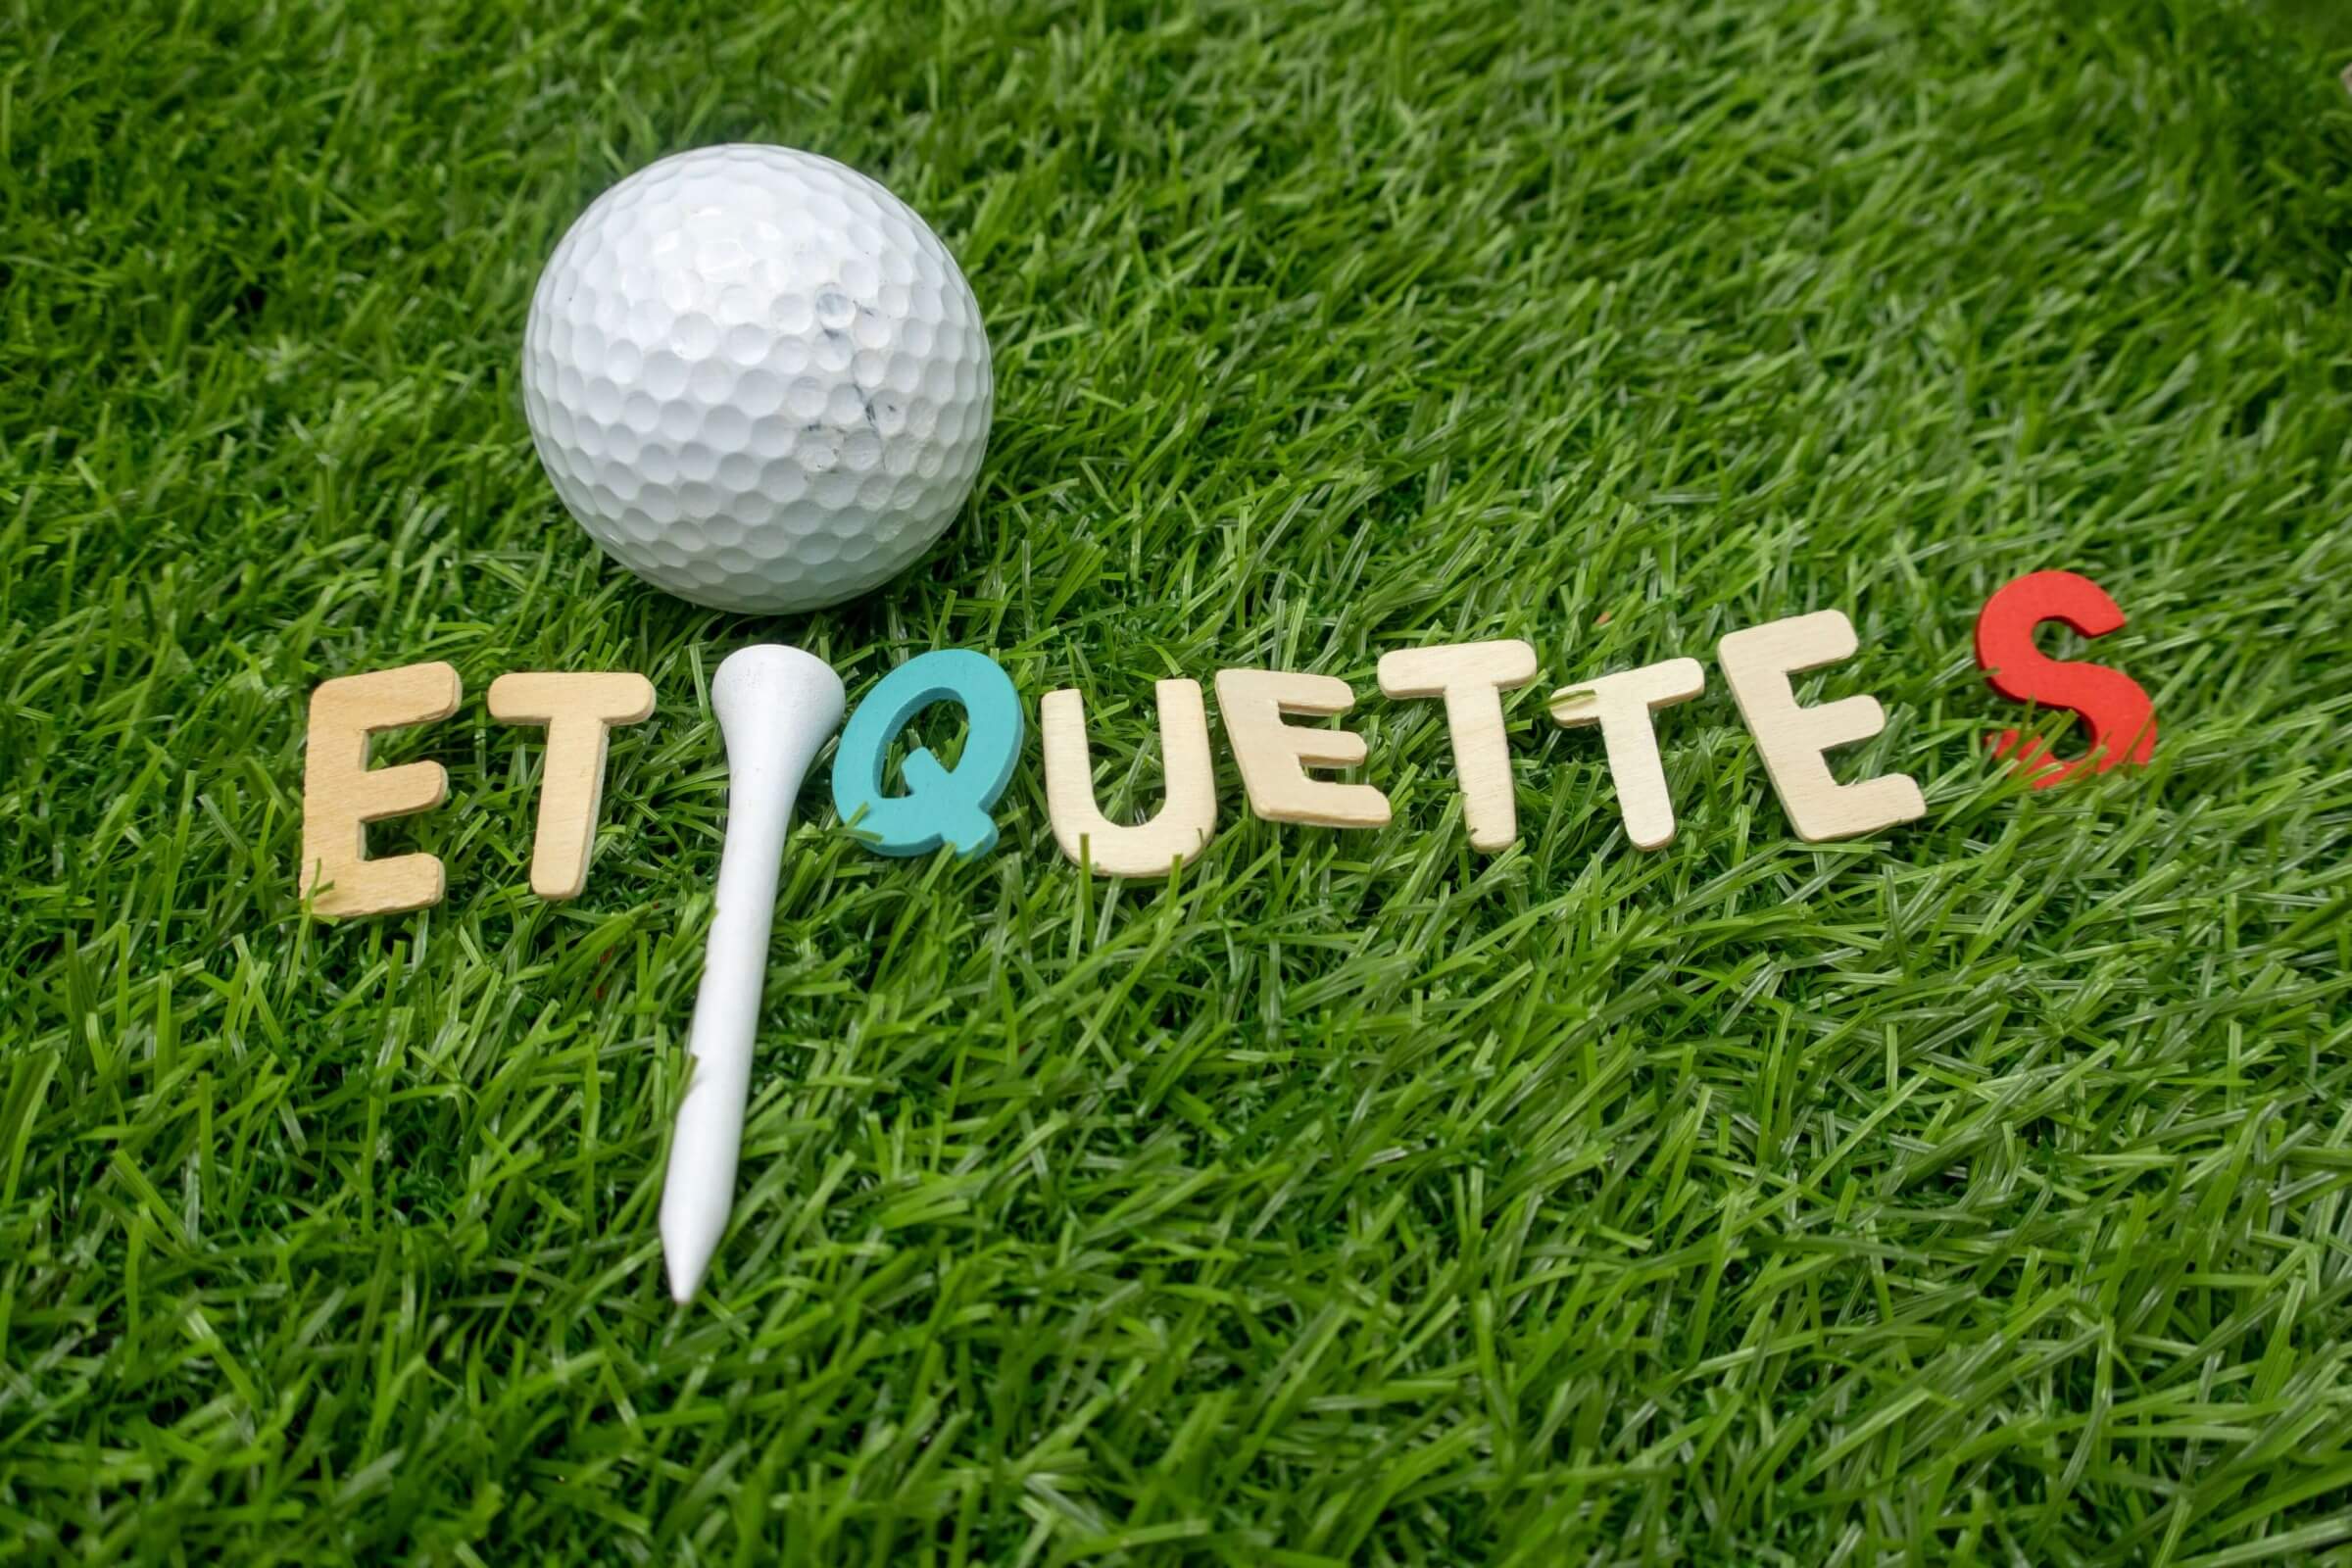 ETIQUETTE, SPIRIT OF THE GAME AND PACE OF PLAY